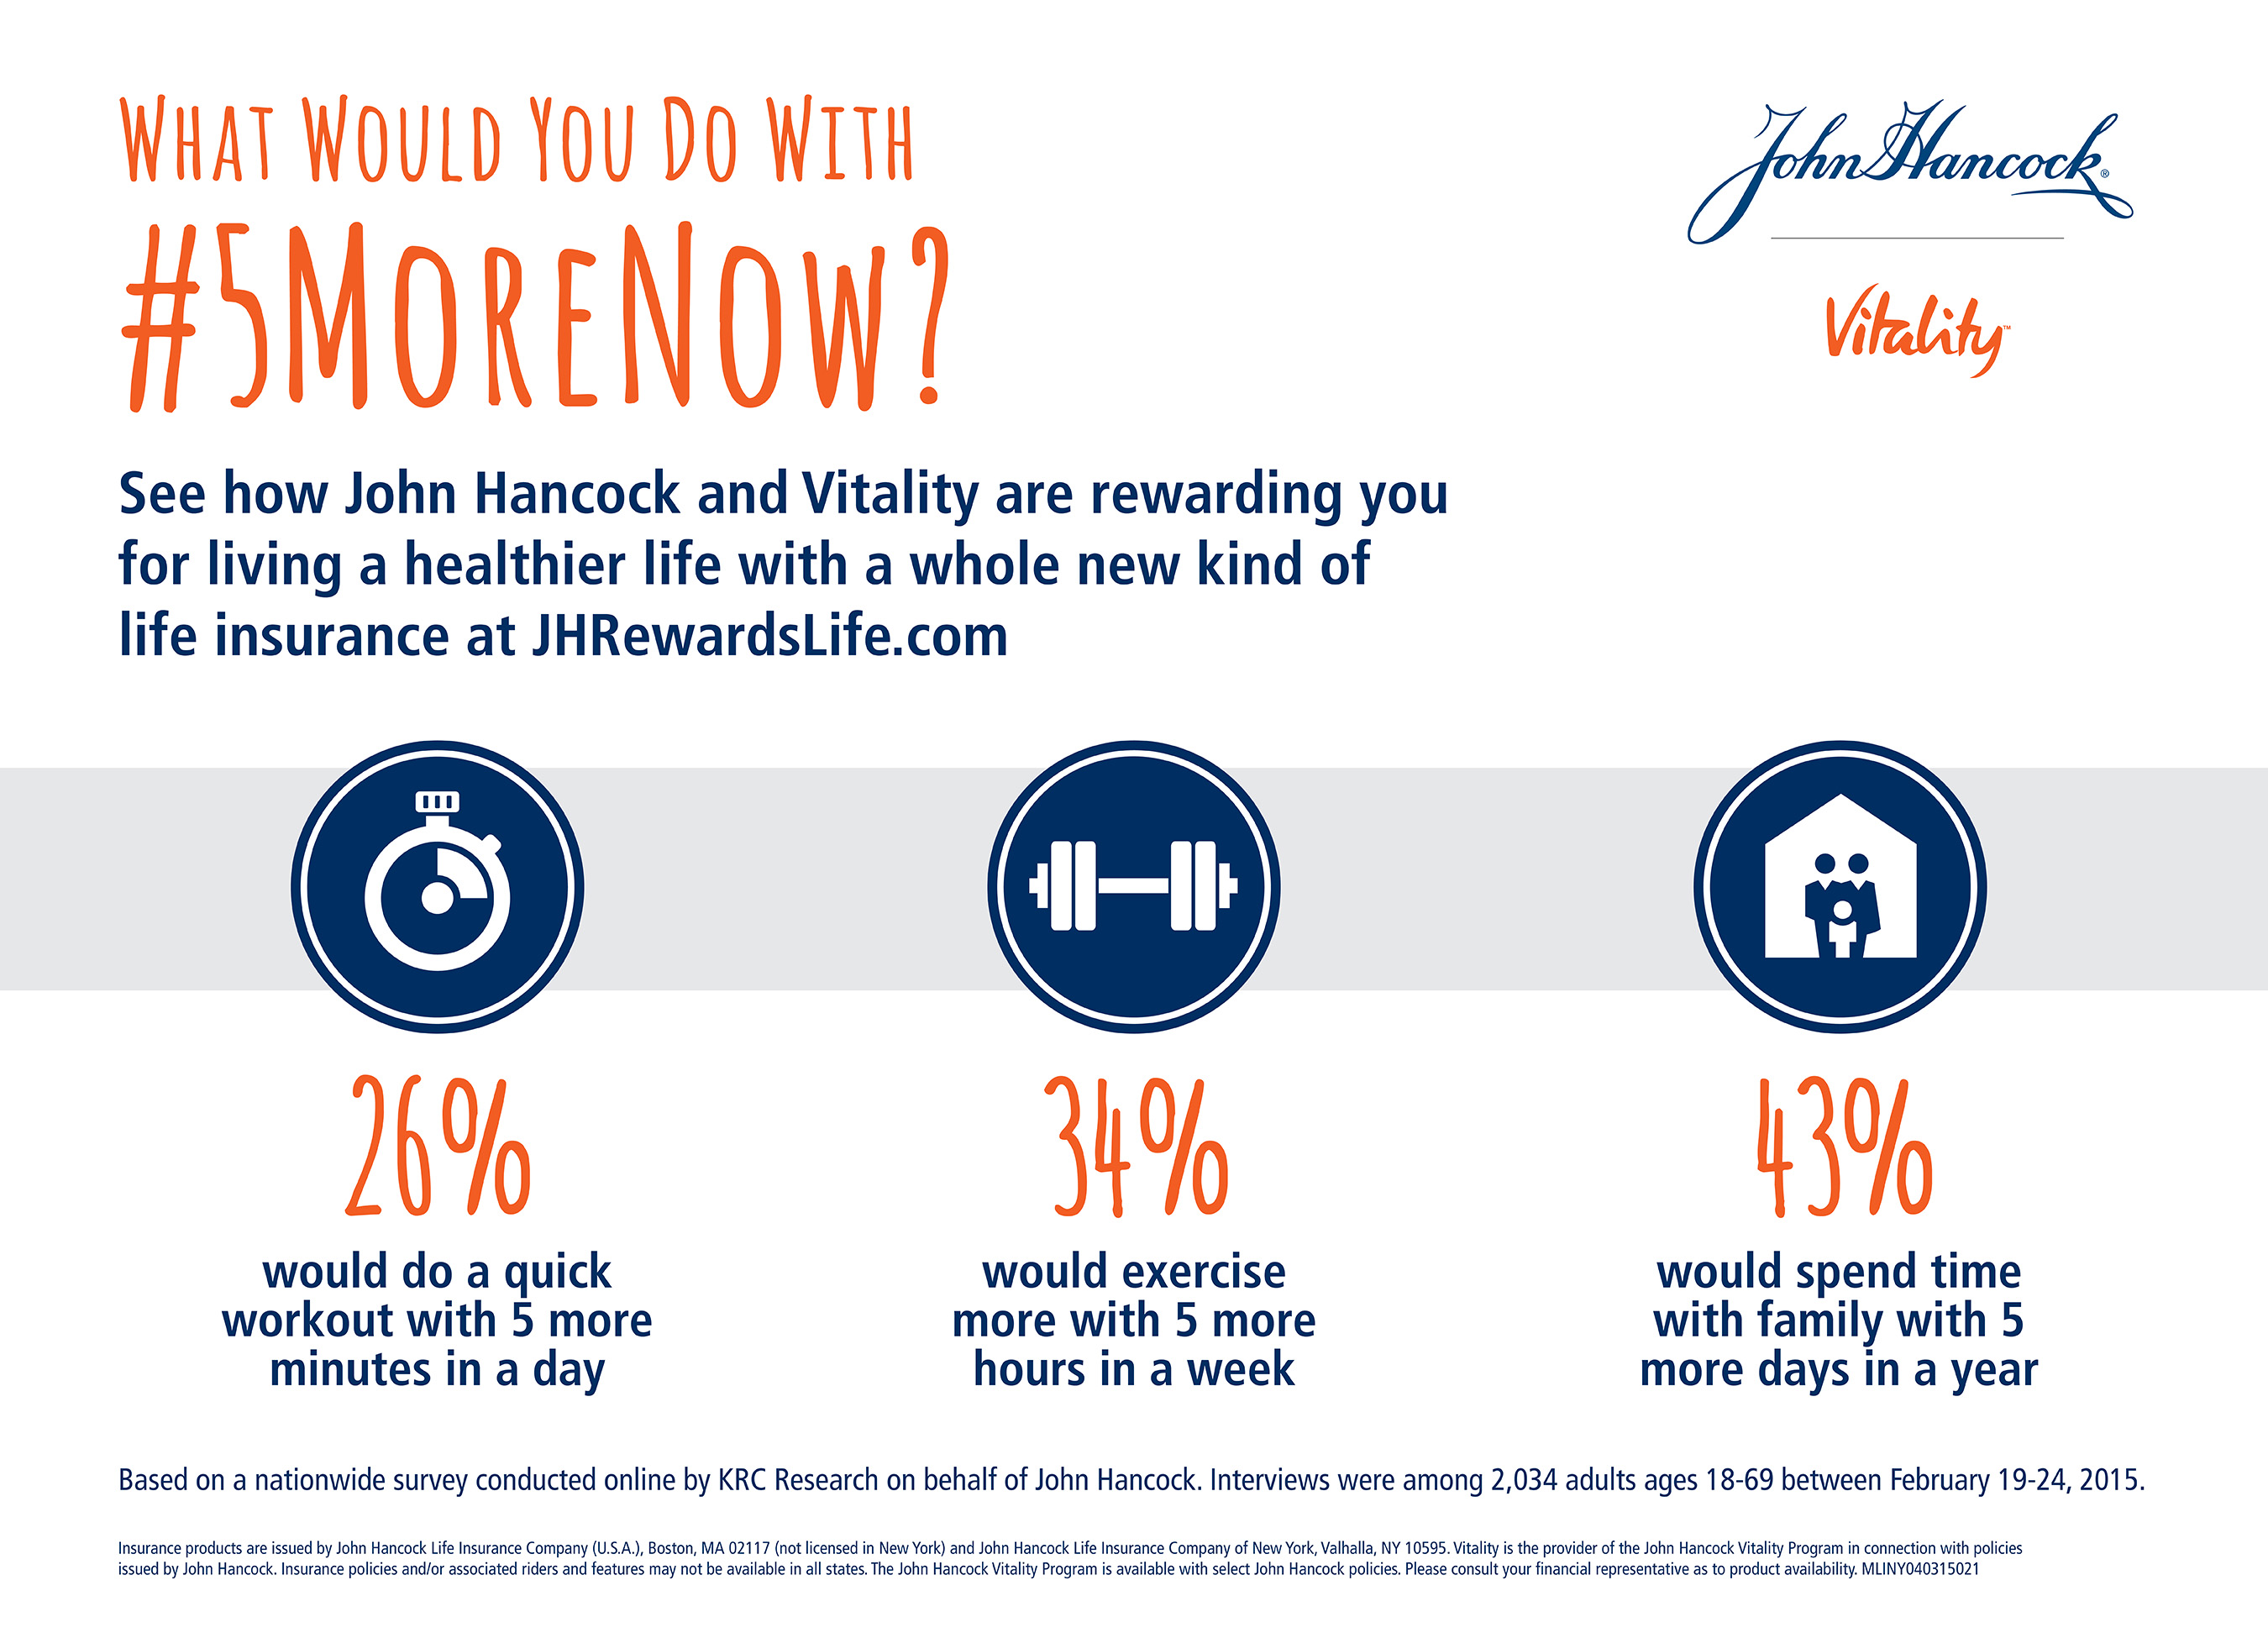 See how John Hancock and Vitality are rewarding you for living a healthier life with a whole new approach to life insurance at JHRewardsLife.com. 